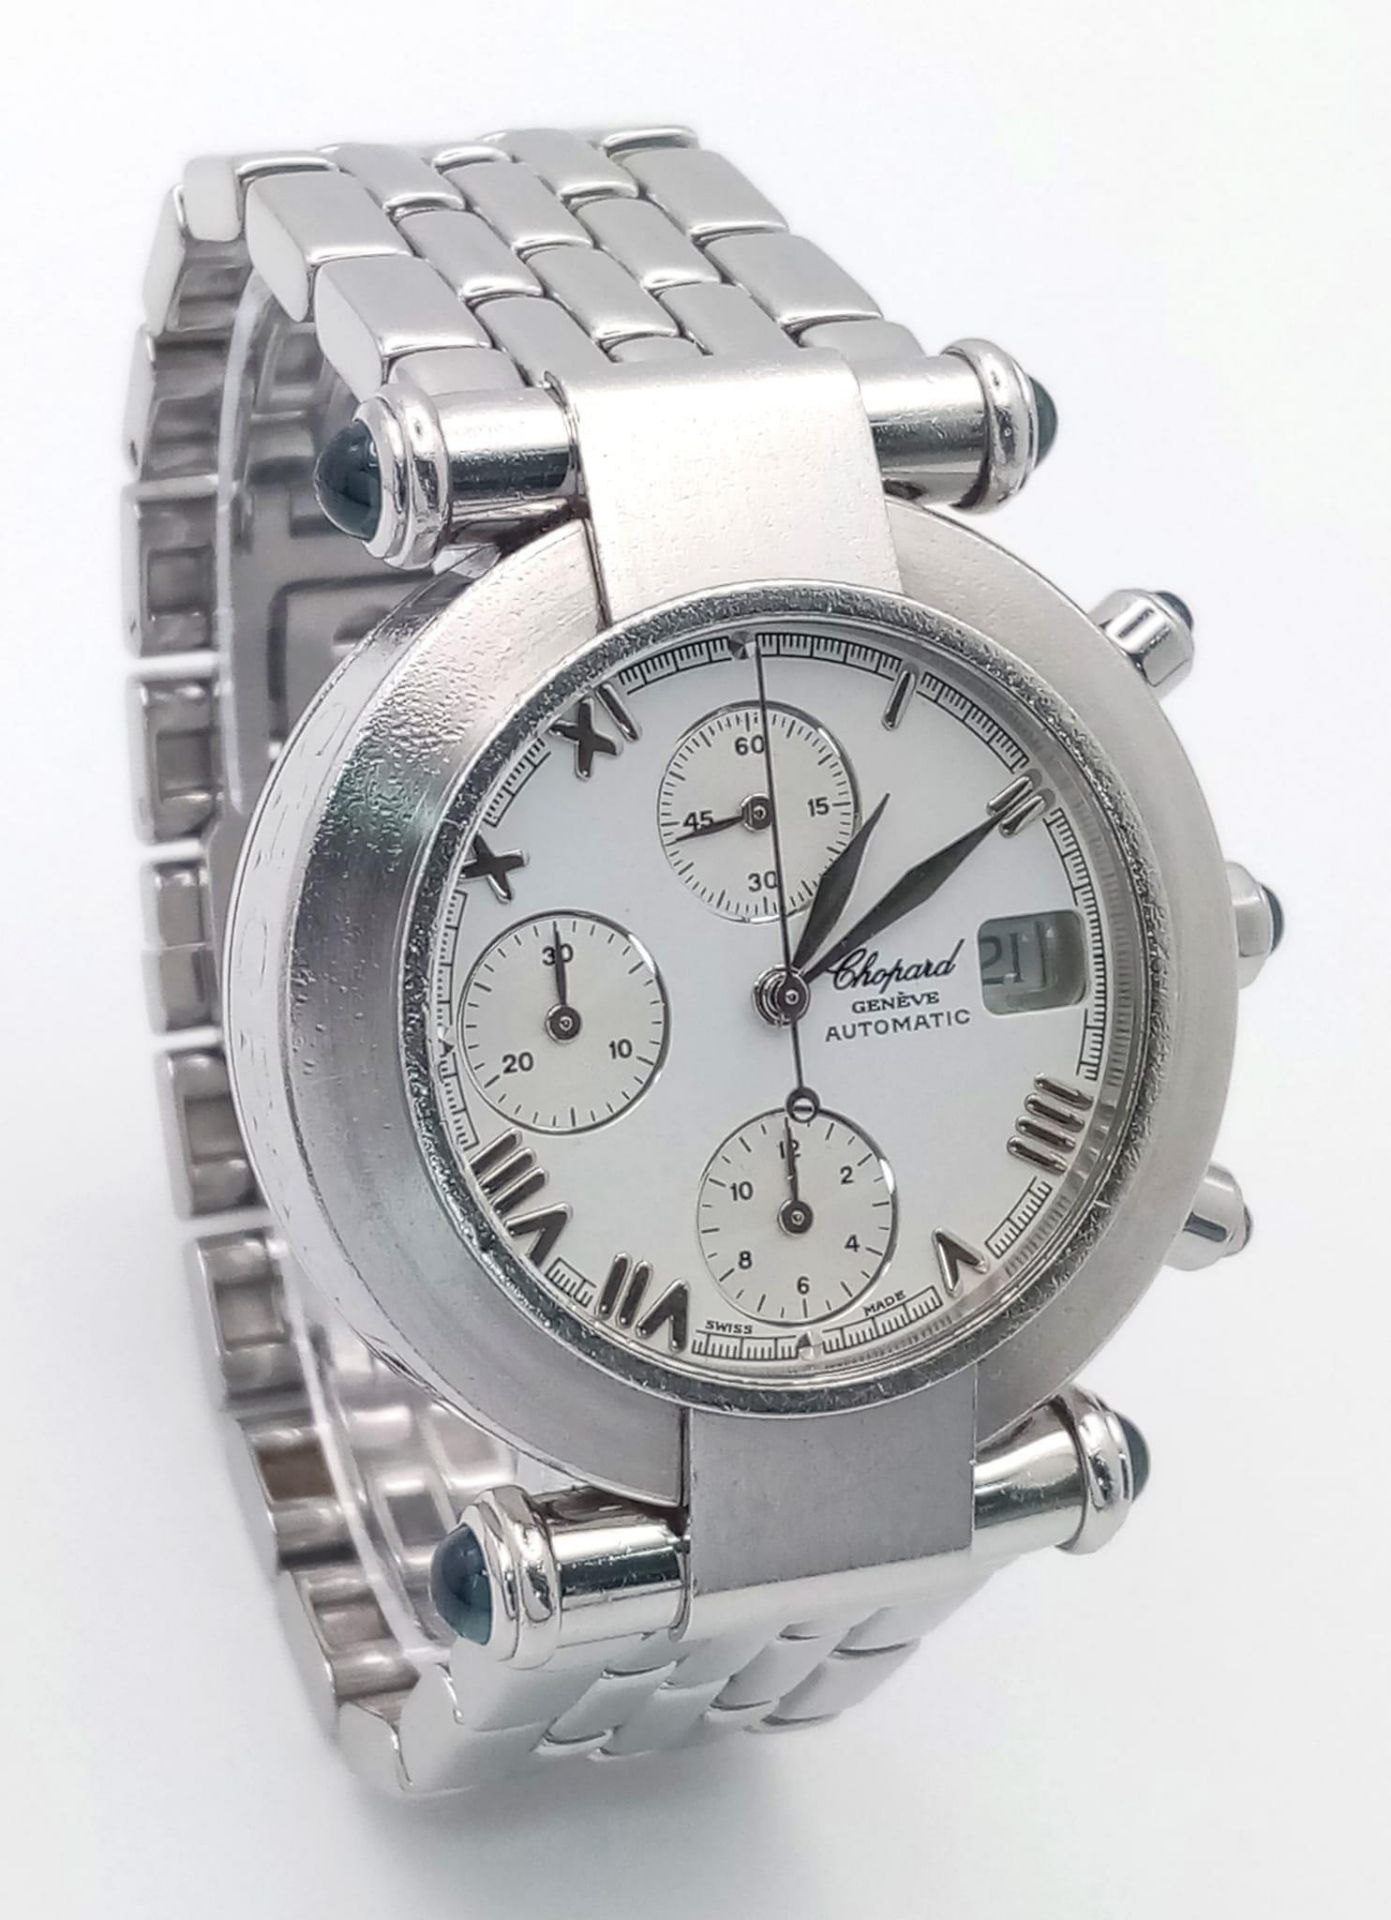 A Chopard Automatic Chronograph Gents Watch. Stainless steel bracelet and case - 37mm. White dial - Image 4 of 16